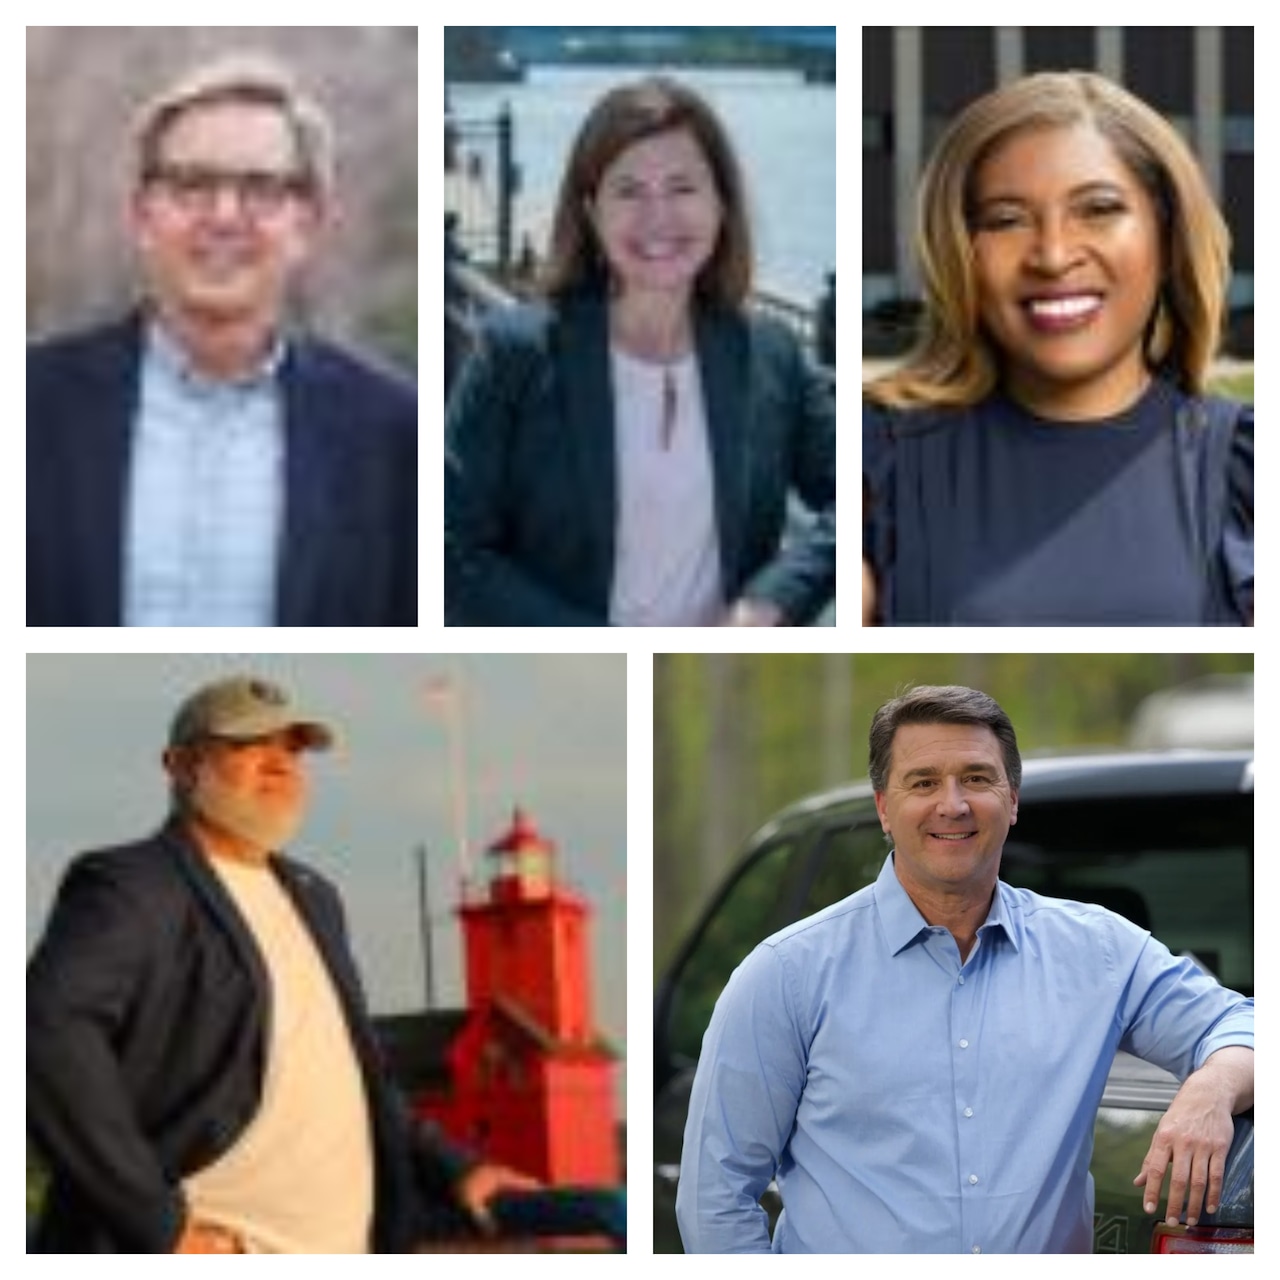 Meet the candidates to replace Dan Kildee in Michigans 8th Congressional District [Video]